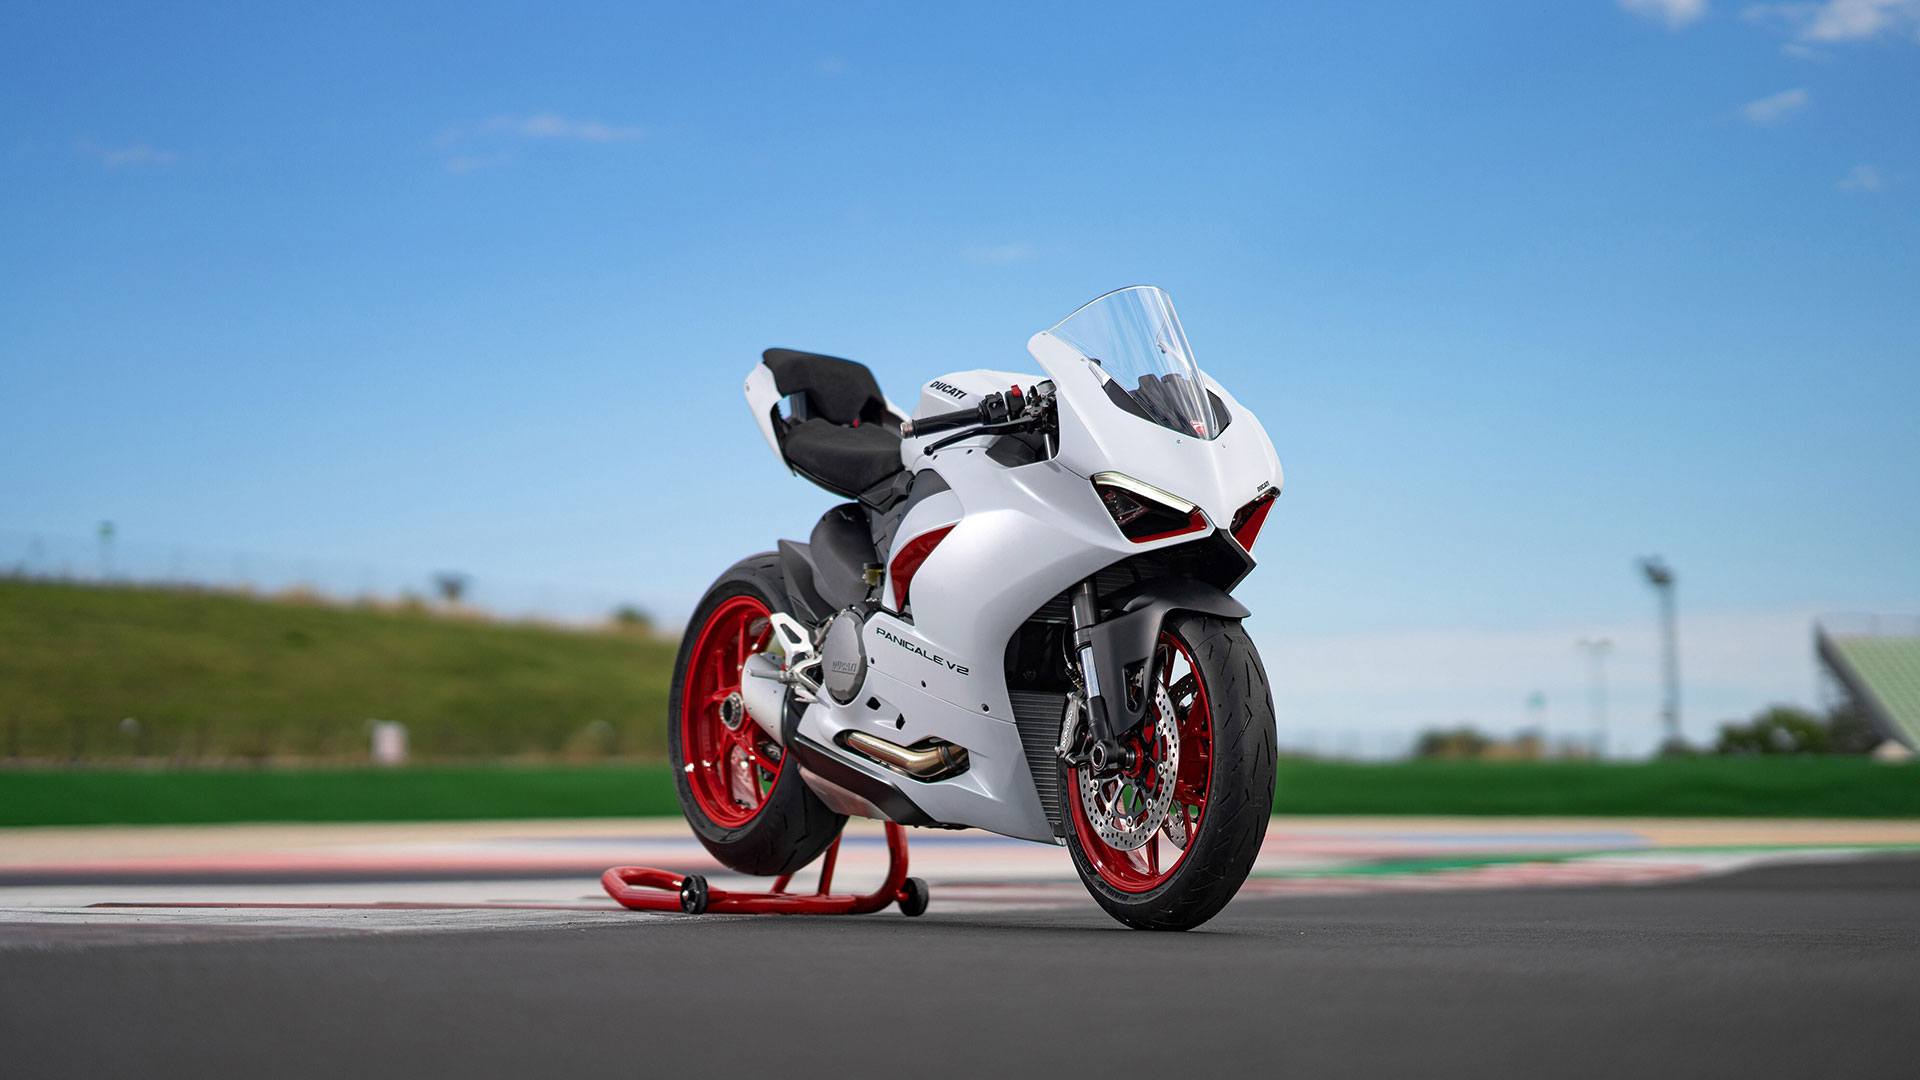 2023 Ducati Panigale V2 in West Allis, Wisconsin - Photo 5